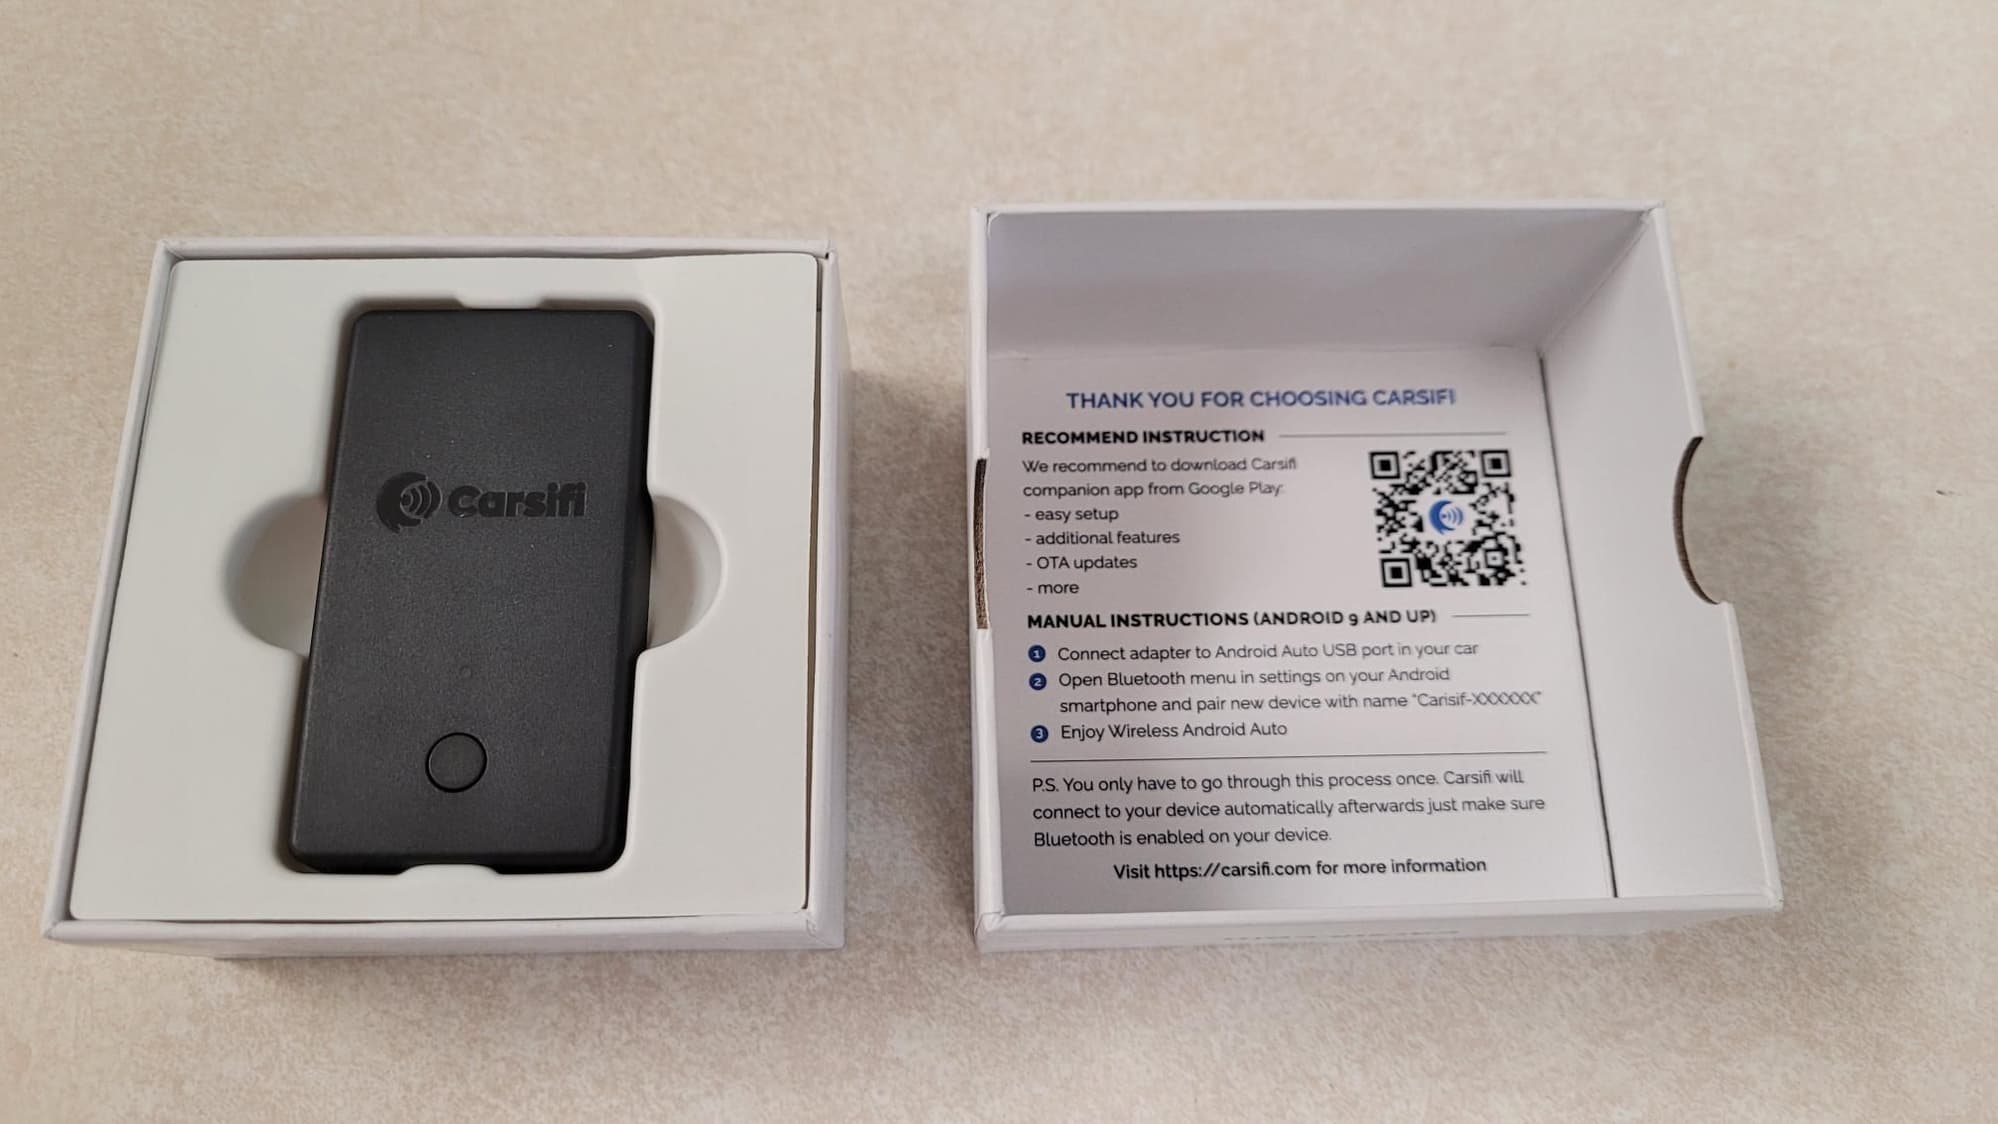 My Carsifi wireless Android Auto adapter showed up today - first